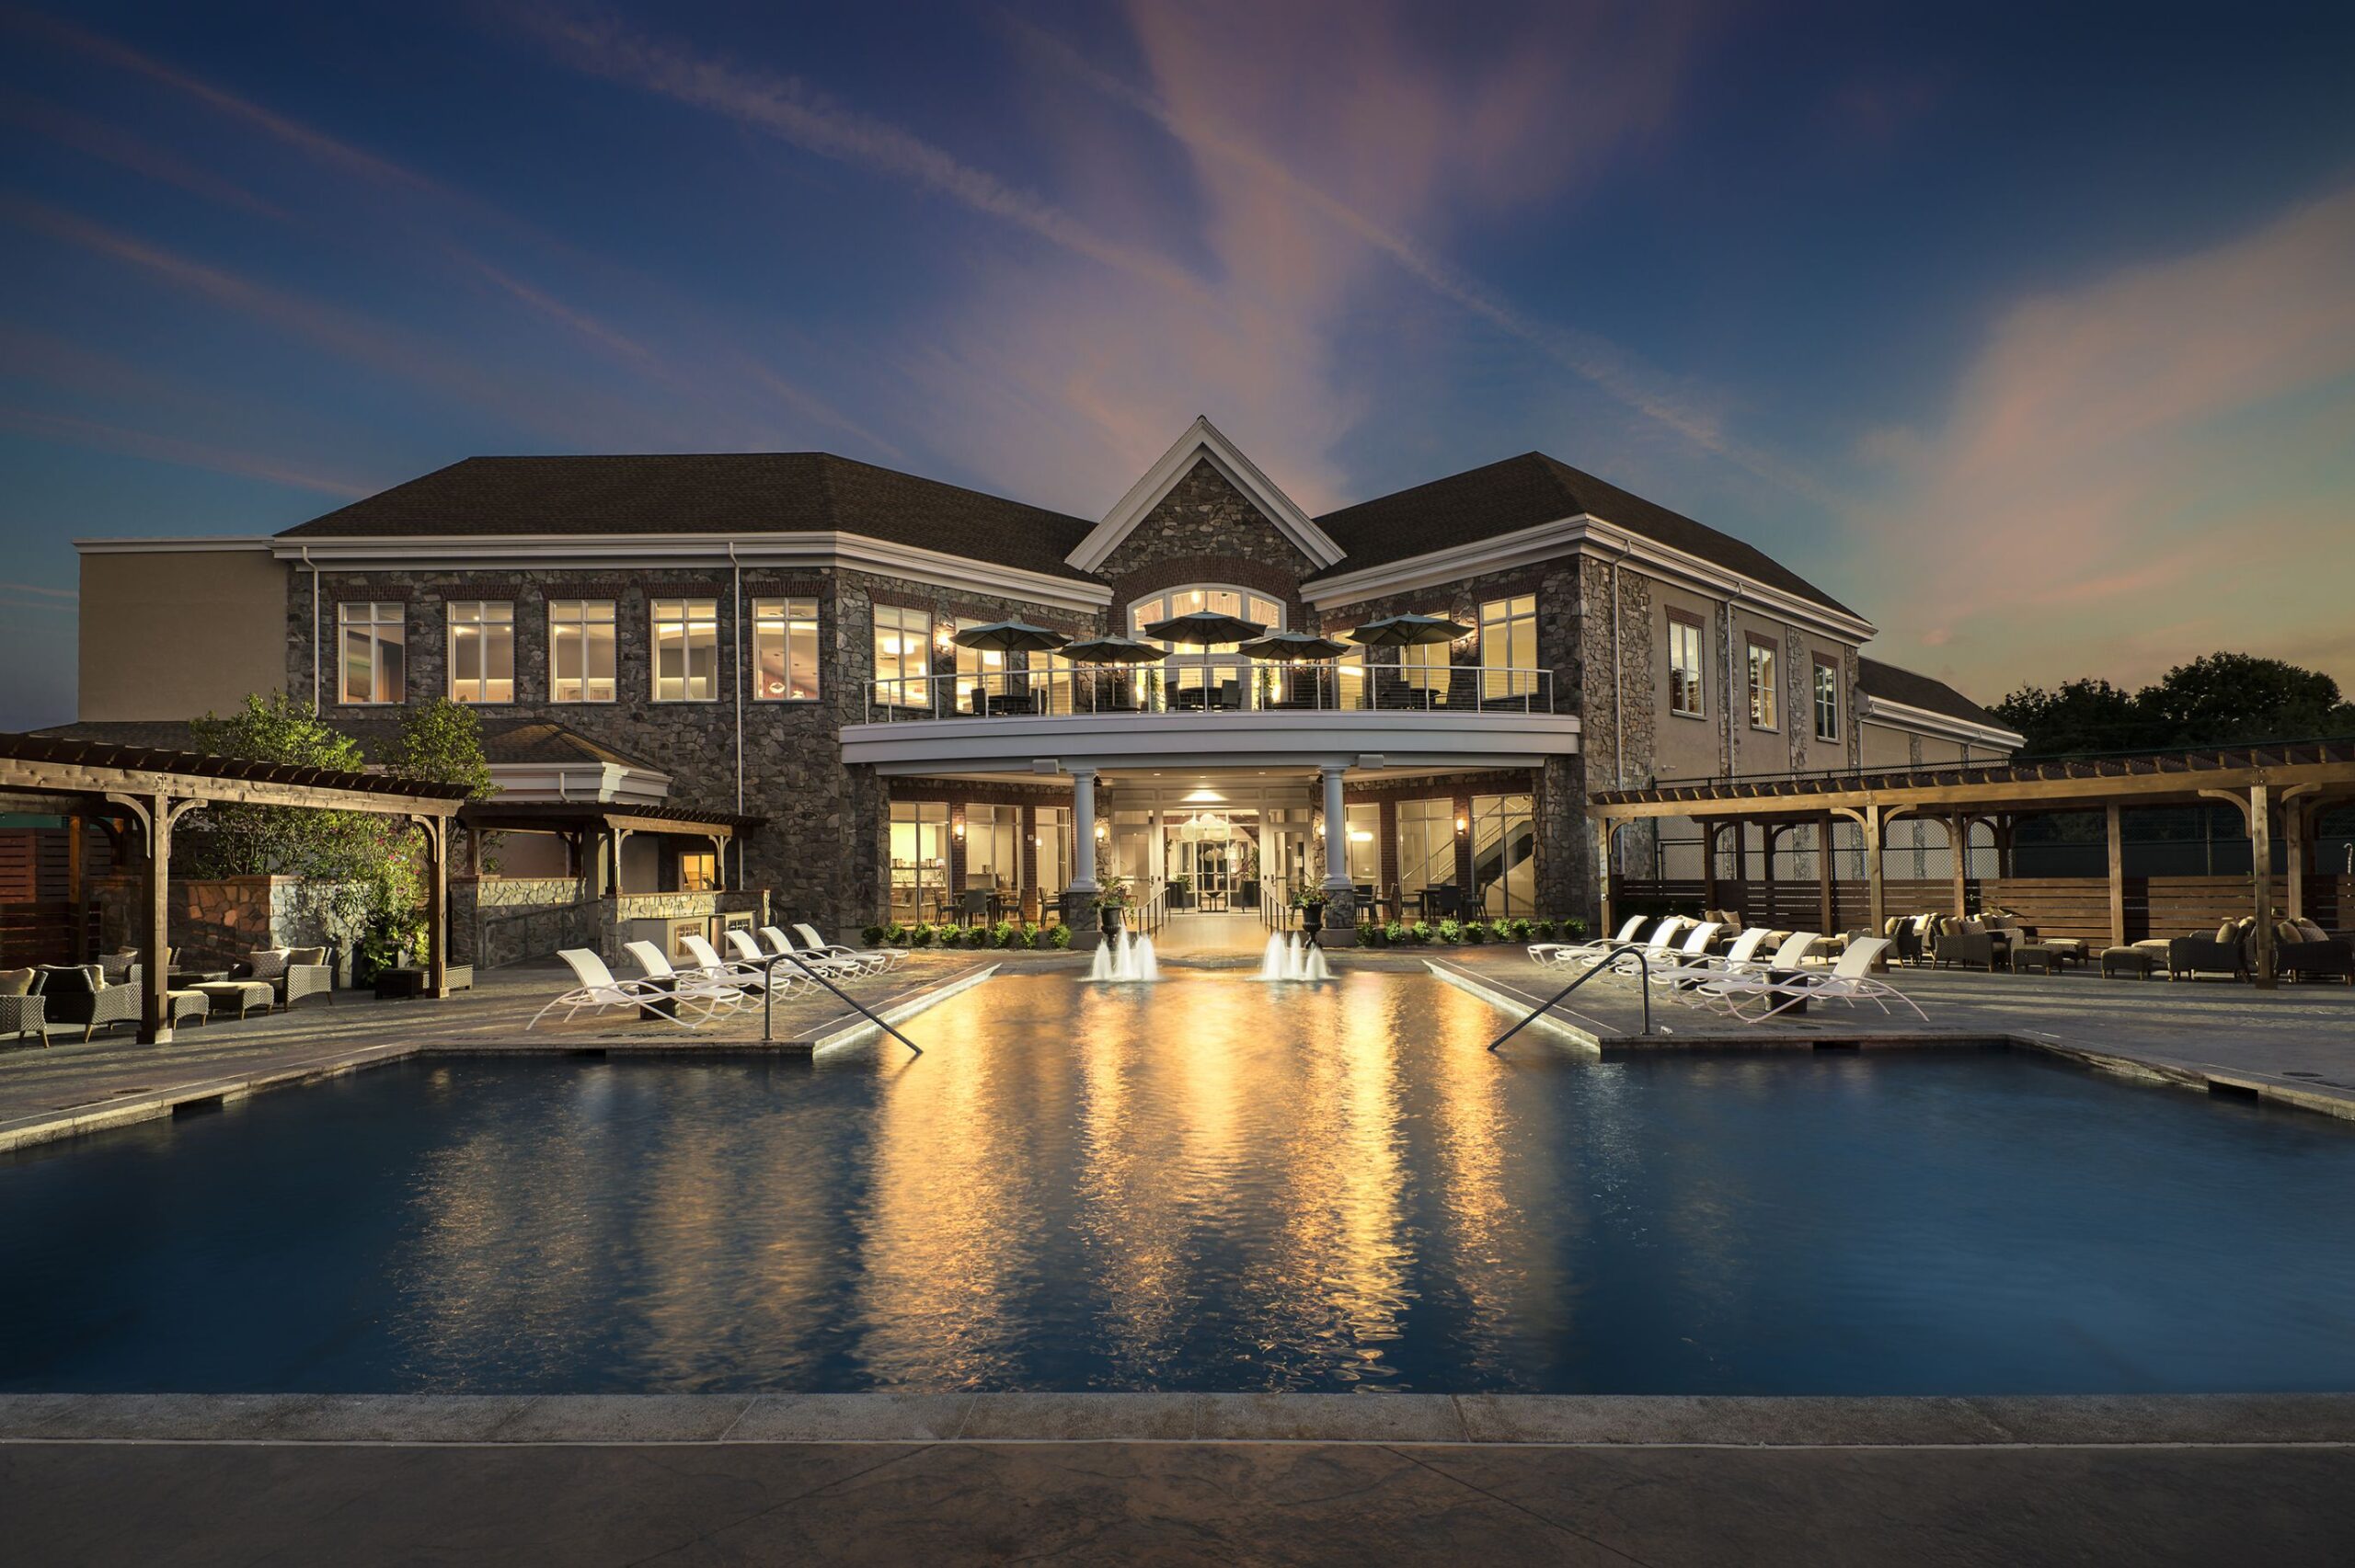 An upscale retirement community featuring a grand mansion set amidst lush surroundings, including a sparkling swimming pool, with a breathtaking dusk view.